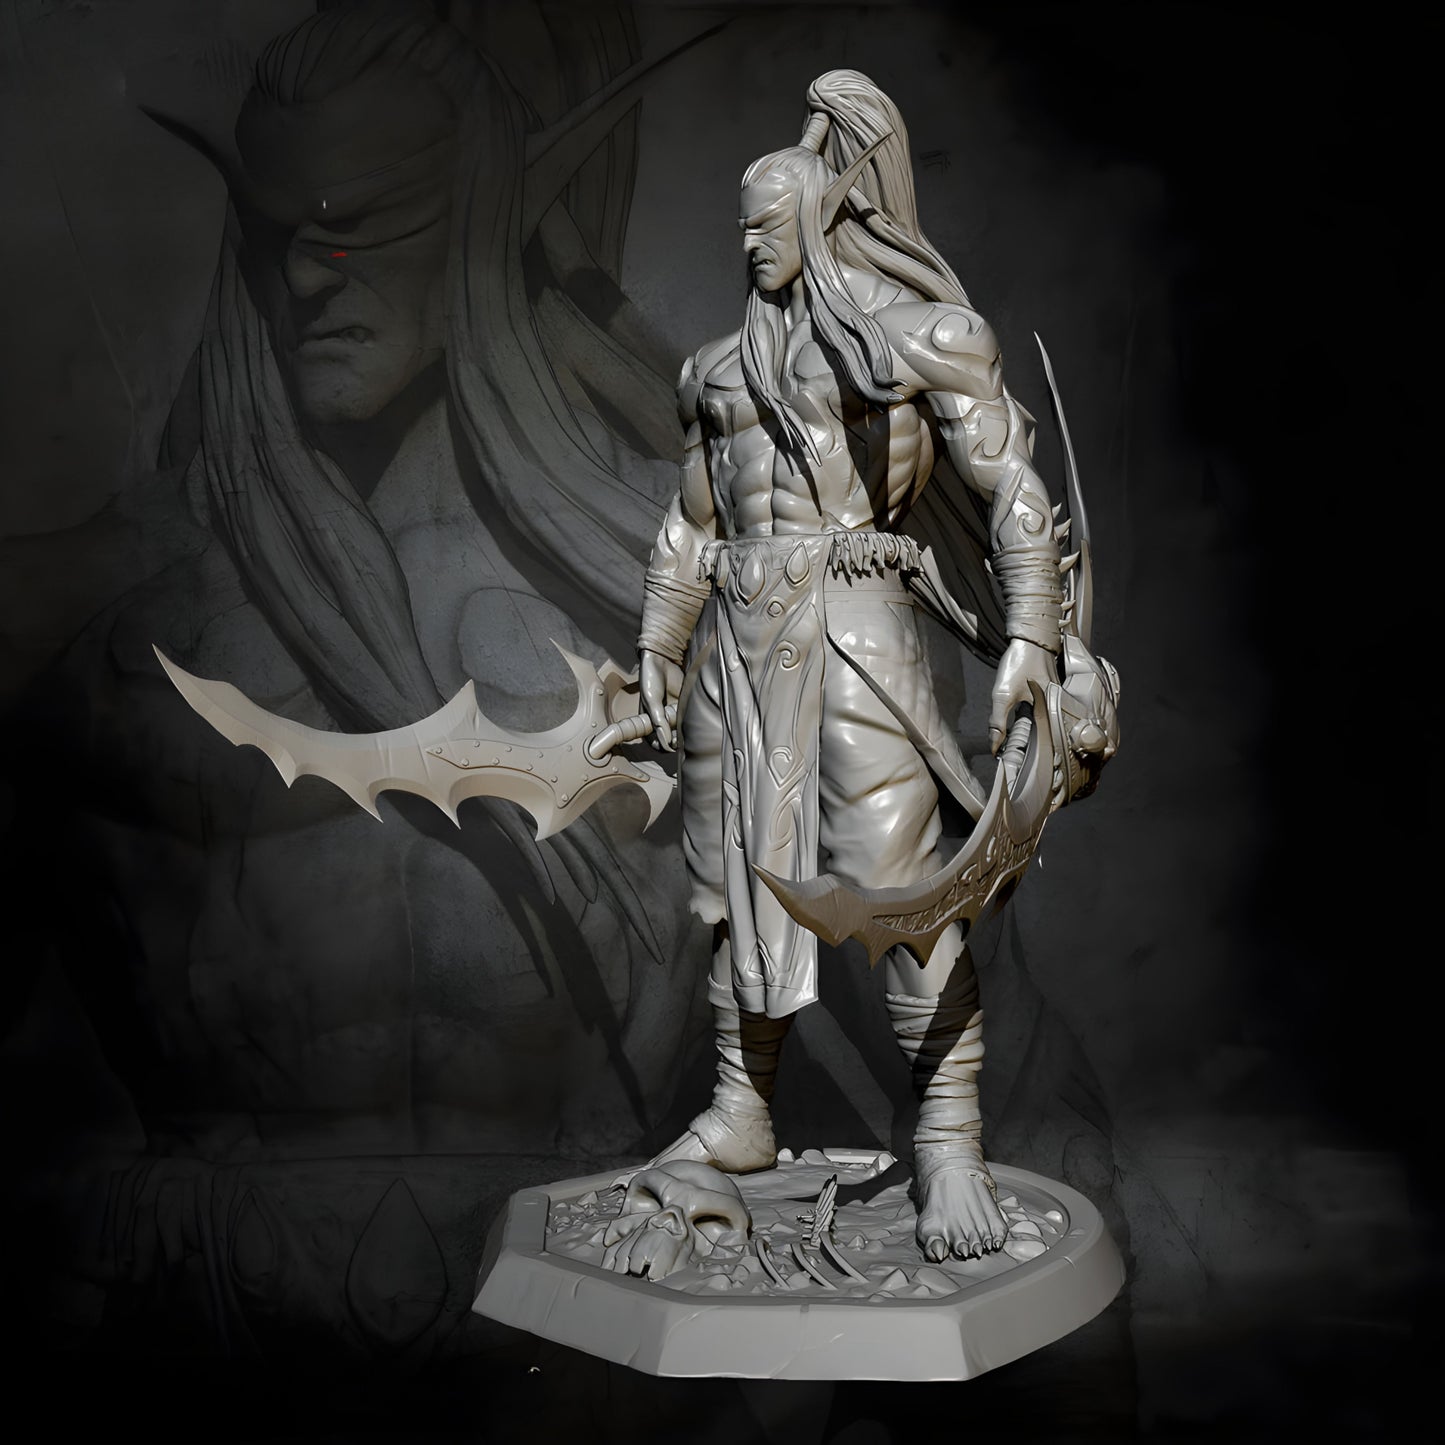 18+ Collector's 3D Printed Model: 75MM Resin model kits self-assemlbed.